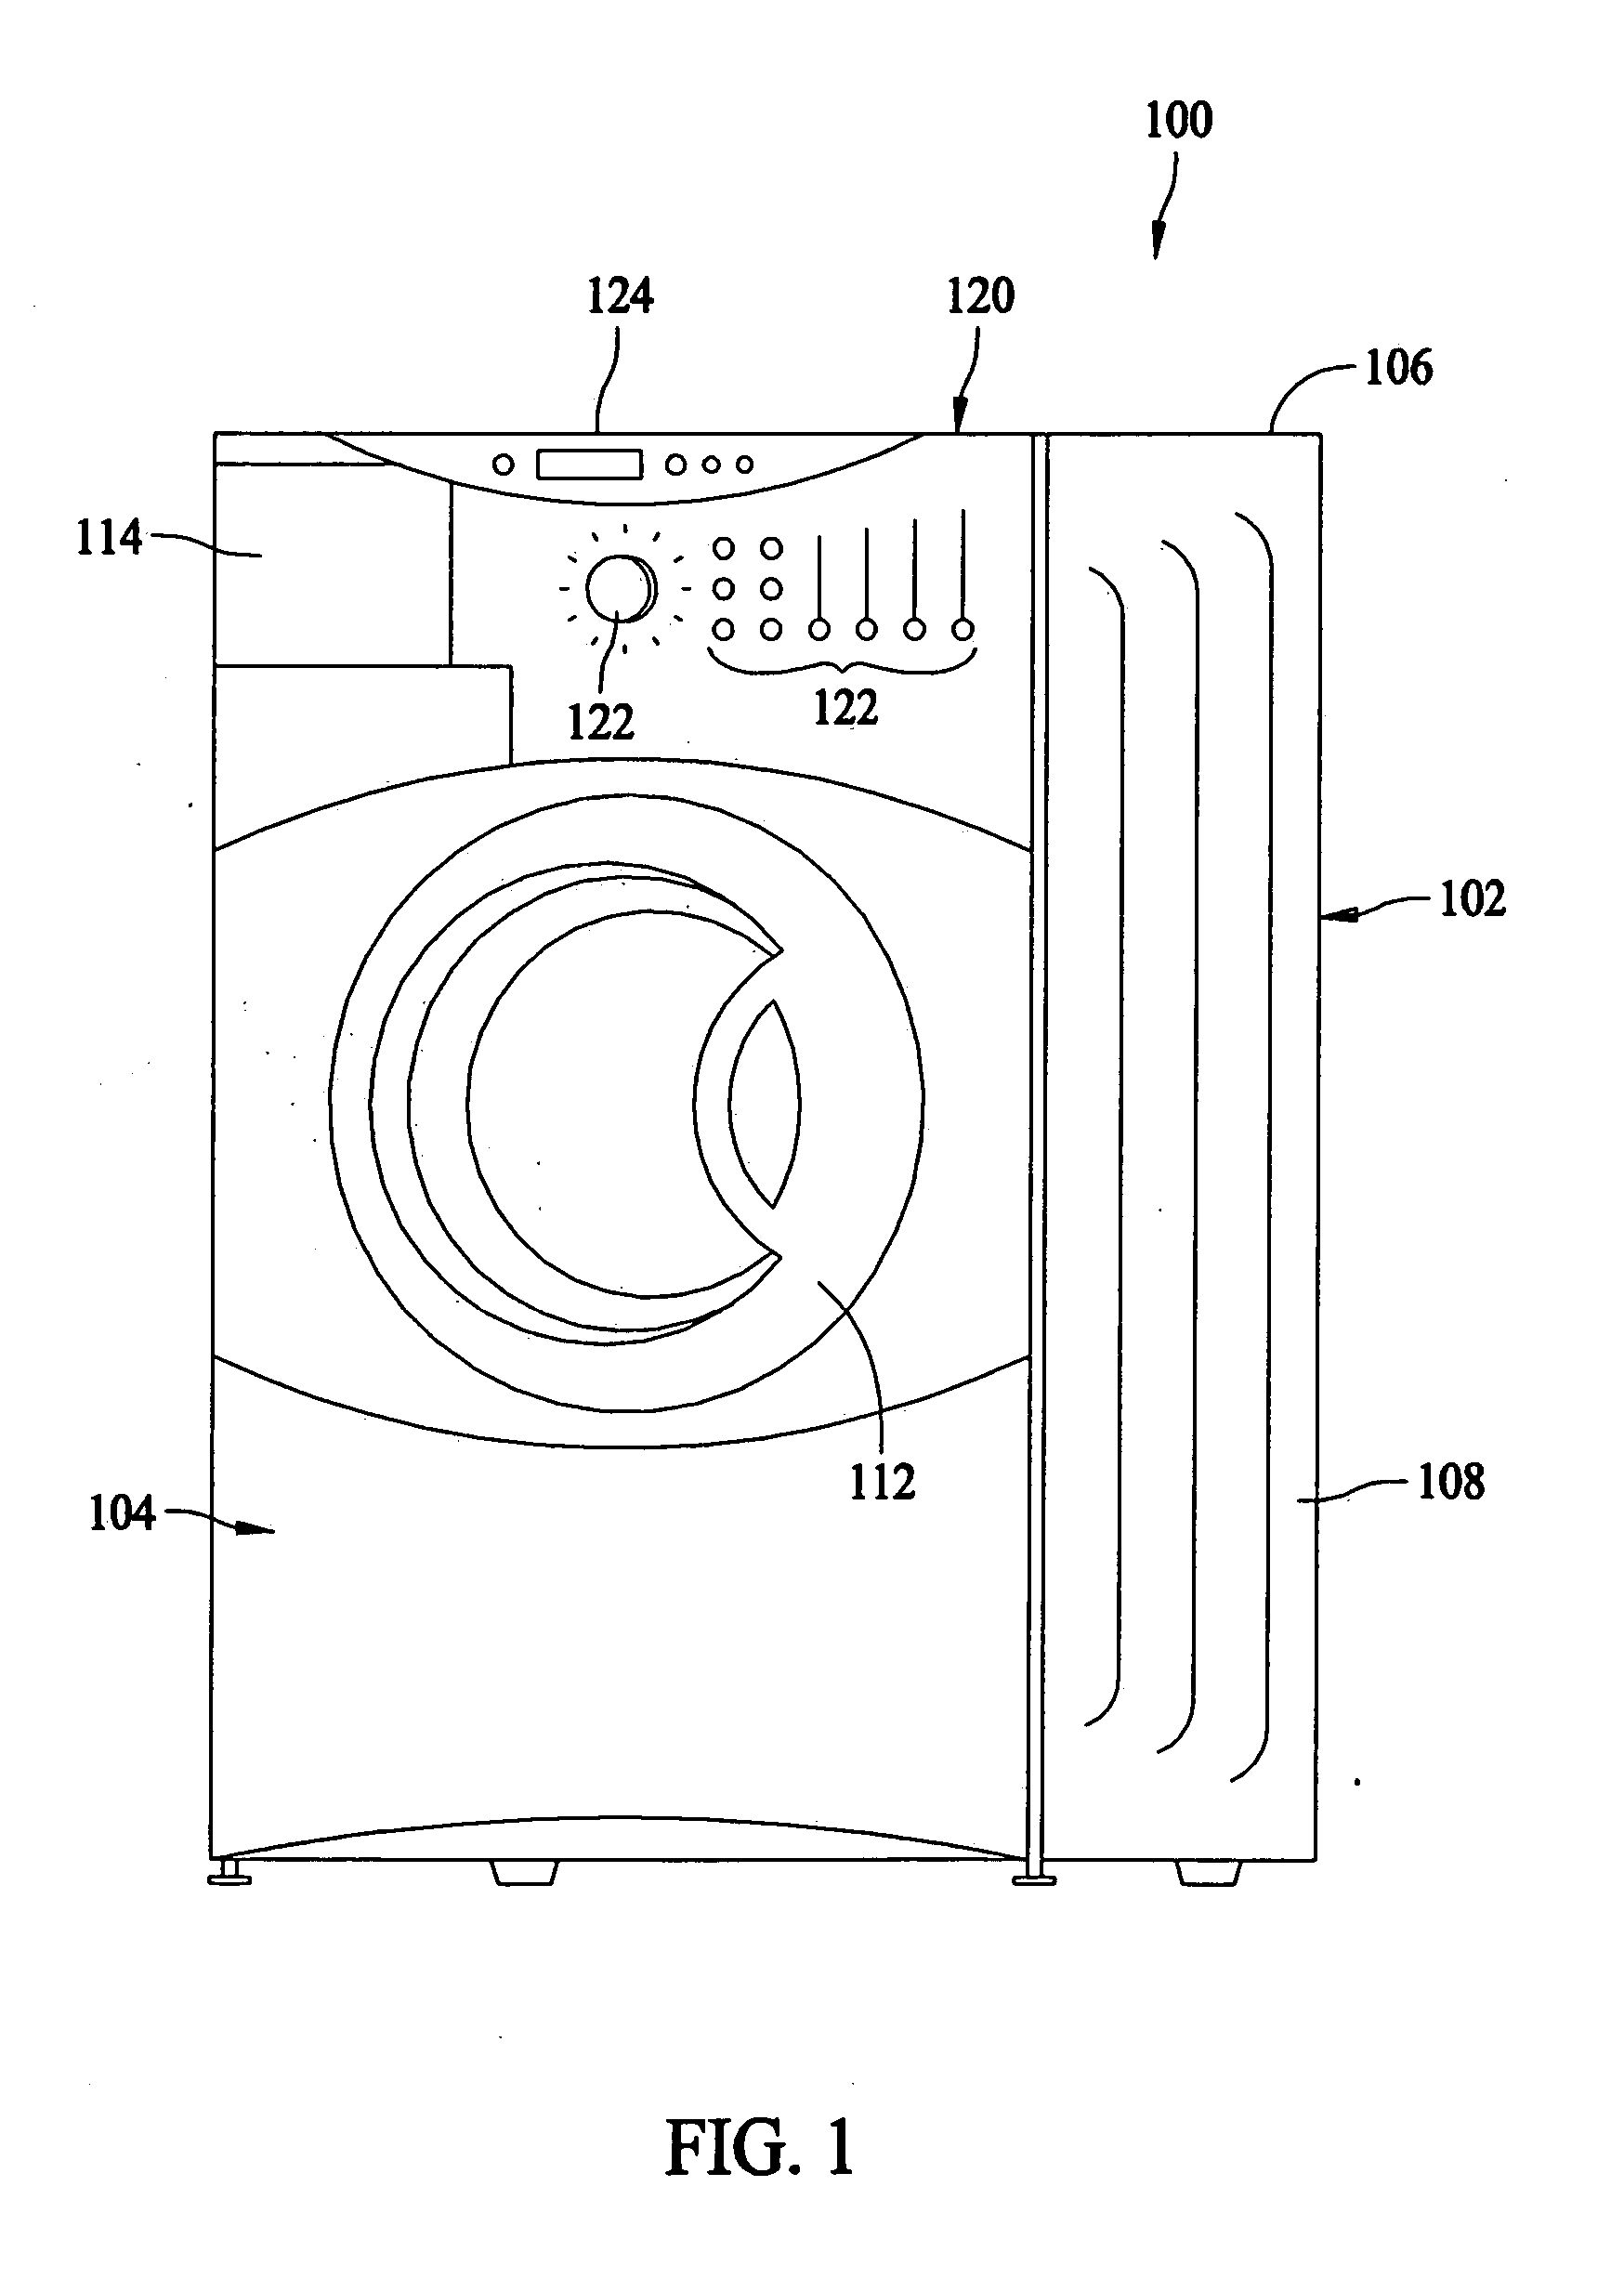 Methods and systems for detecting dryness of clothes in an appliance